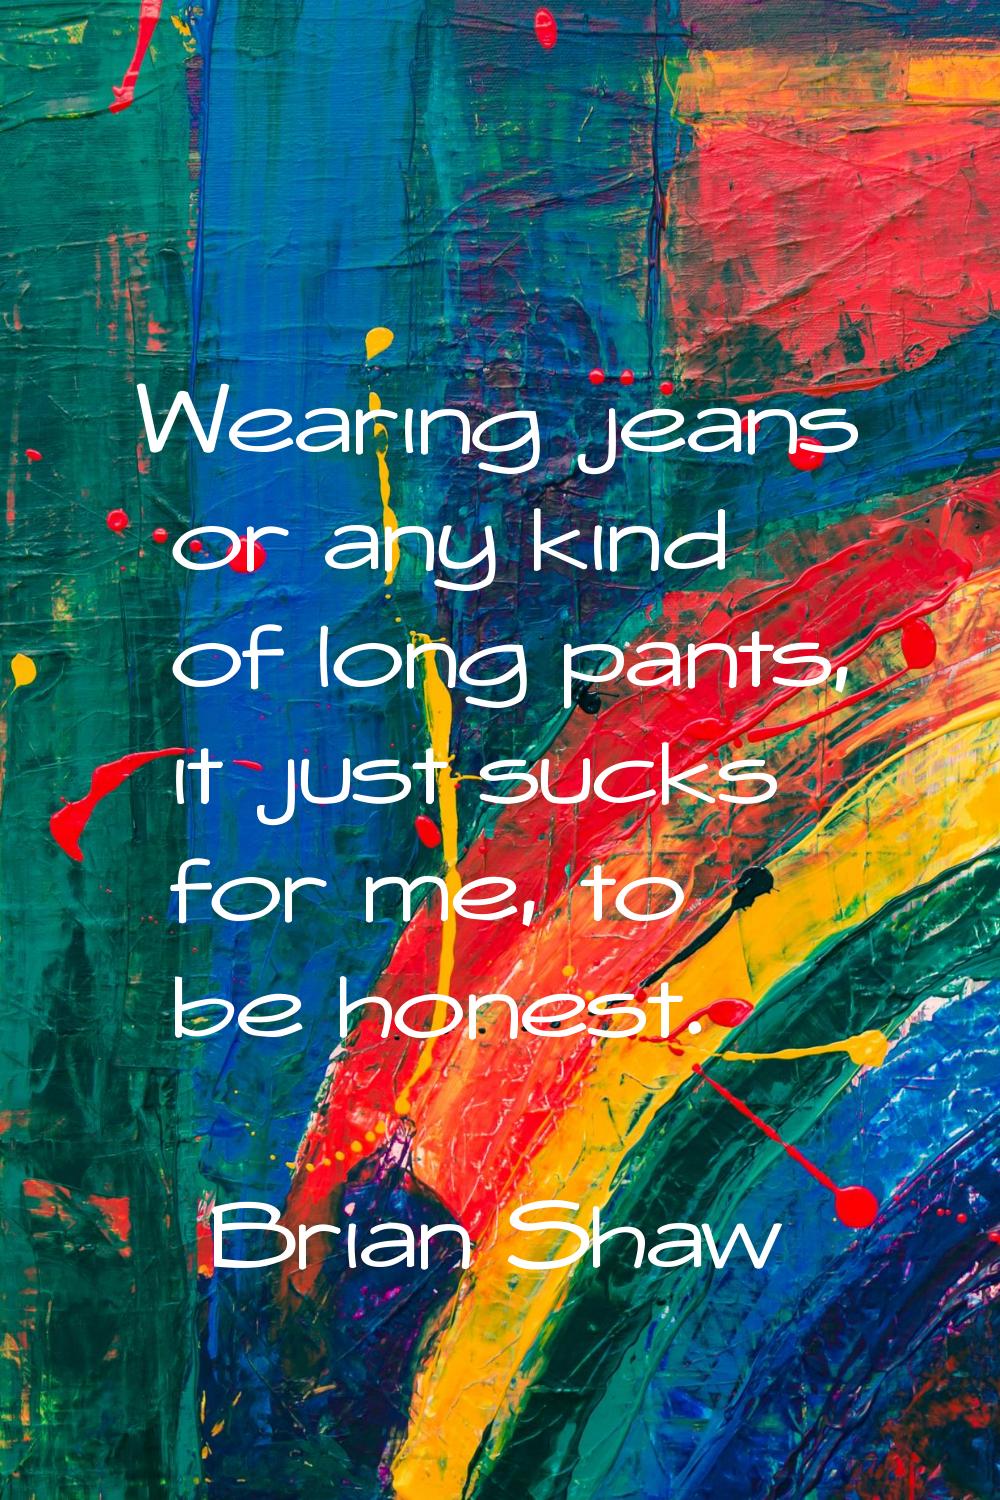 Wearing jeans or any kind of long pants, it just sucks for me, to be honest.